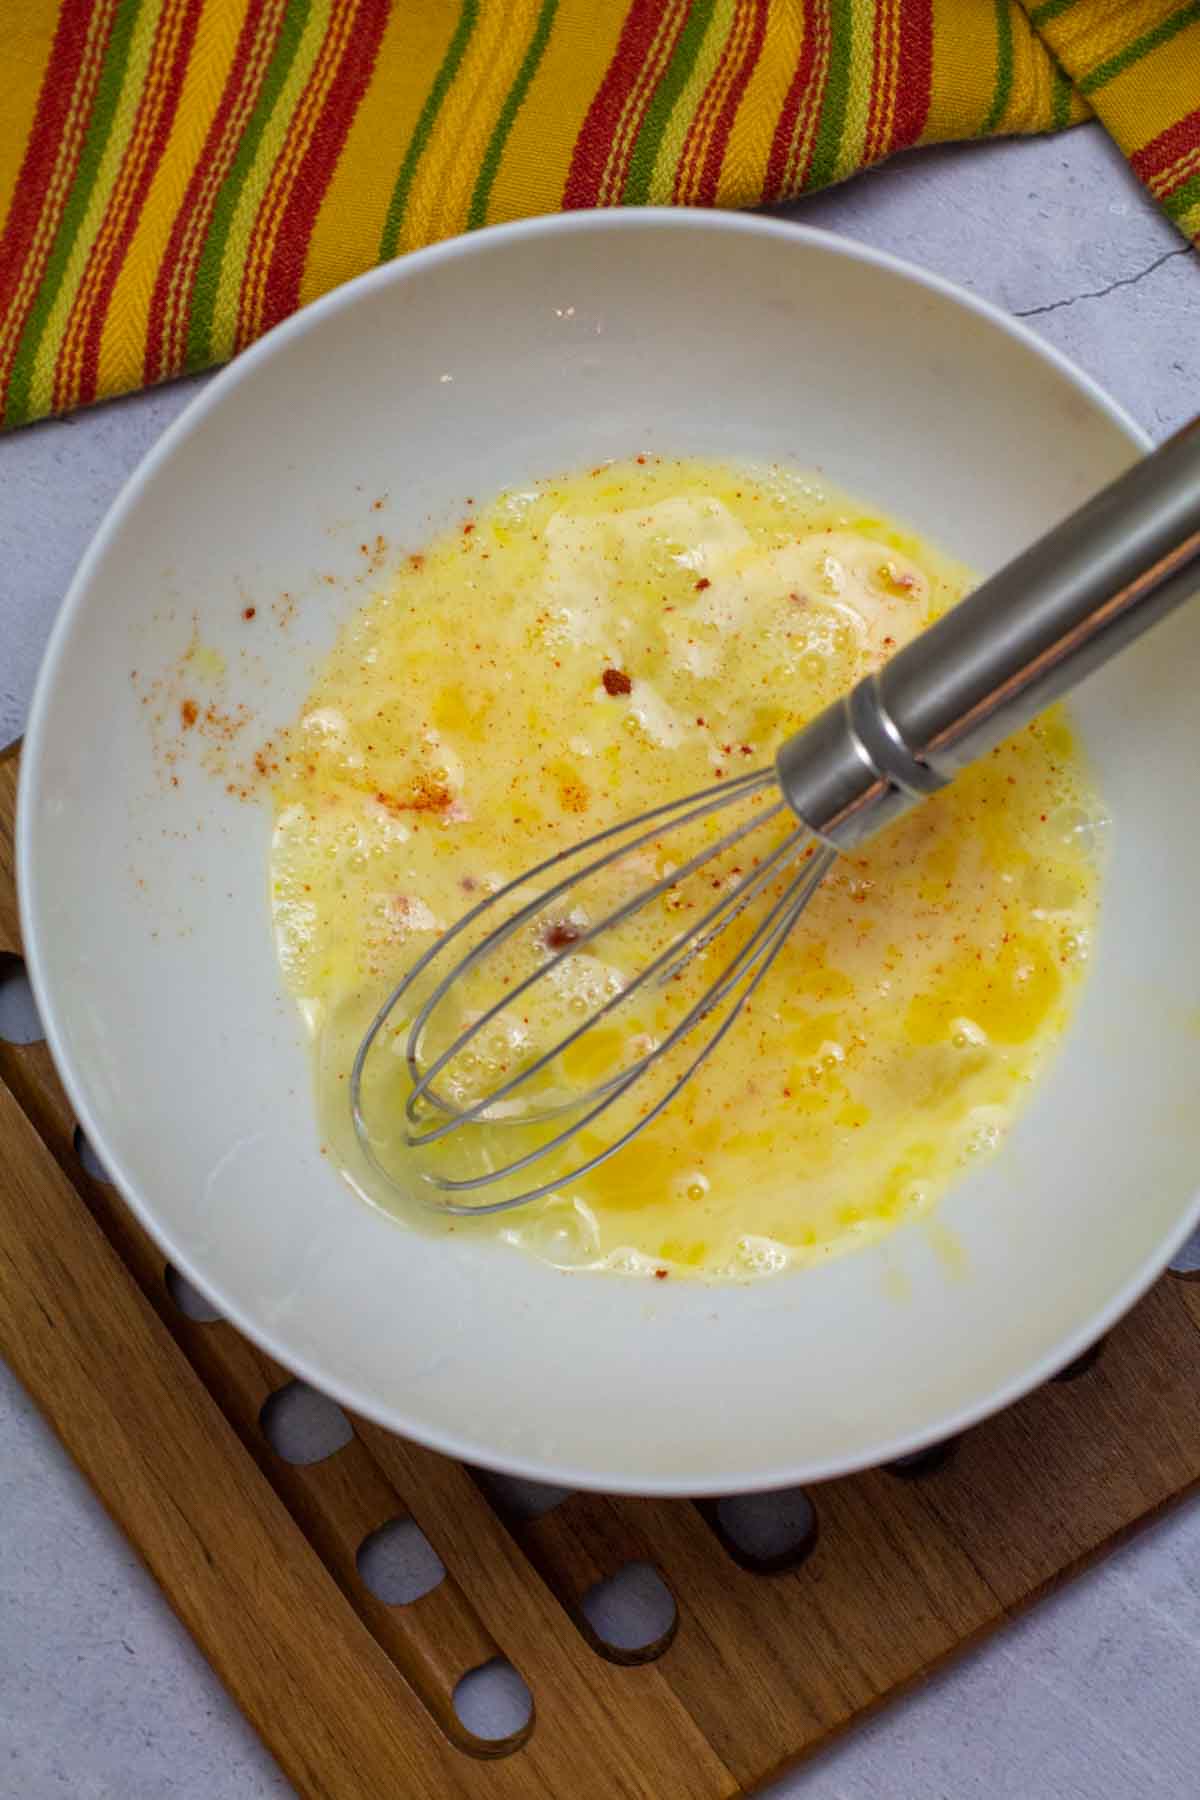 Mixing eggs with chile powder to make a Mexican Omelette,